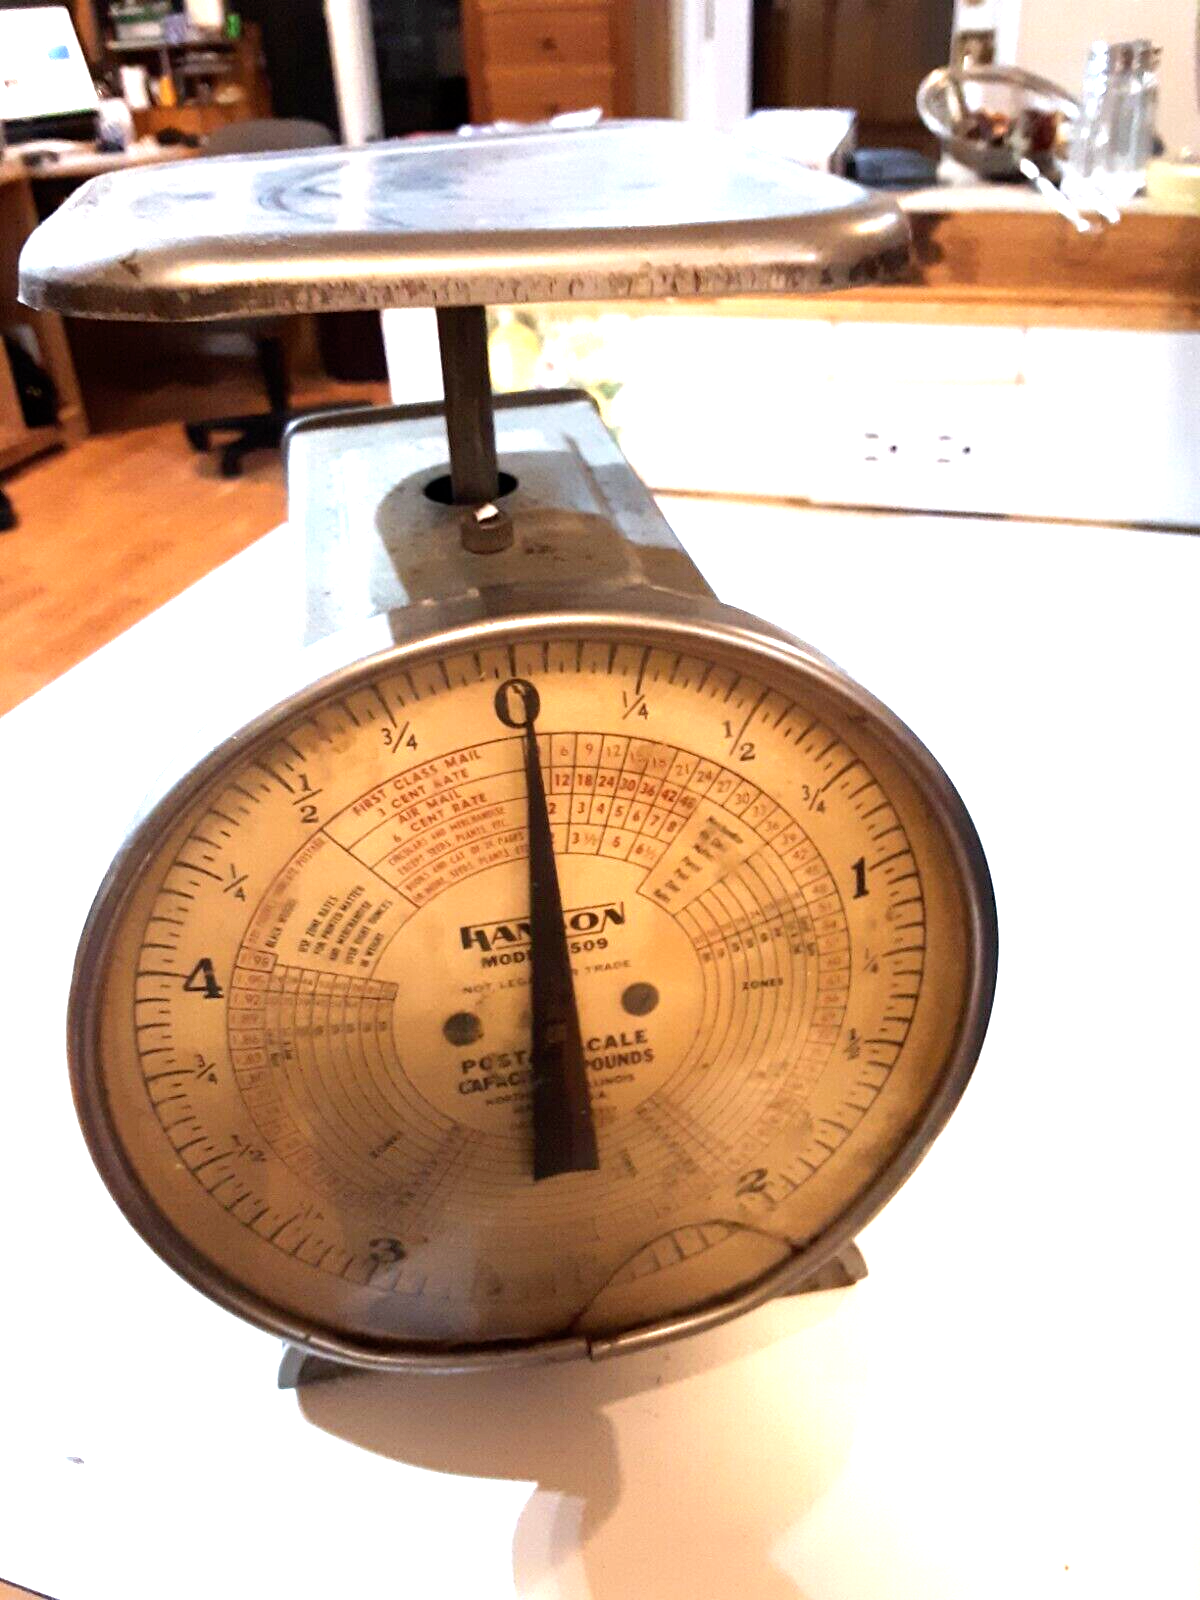 Postal Scale Air Mail Vtg. PO Post Office Tool 5 Pounds 1953 Hanson Model 1509 - $43.56